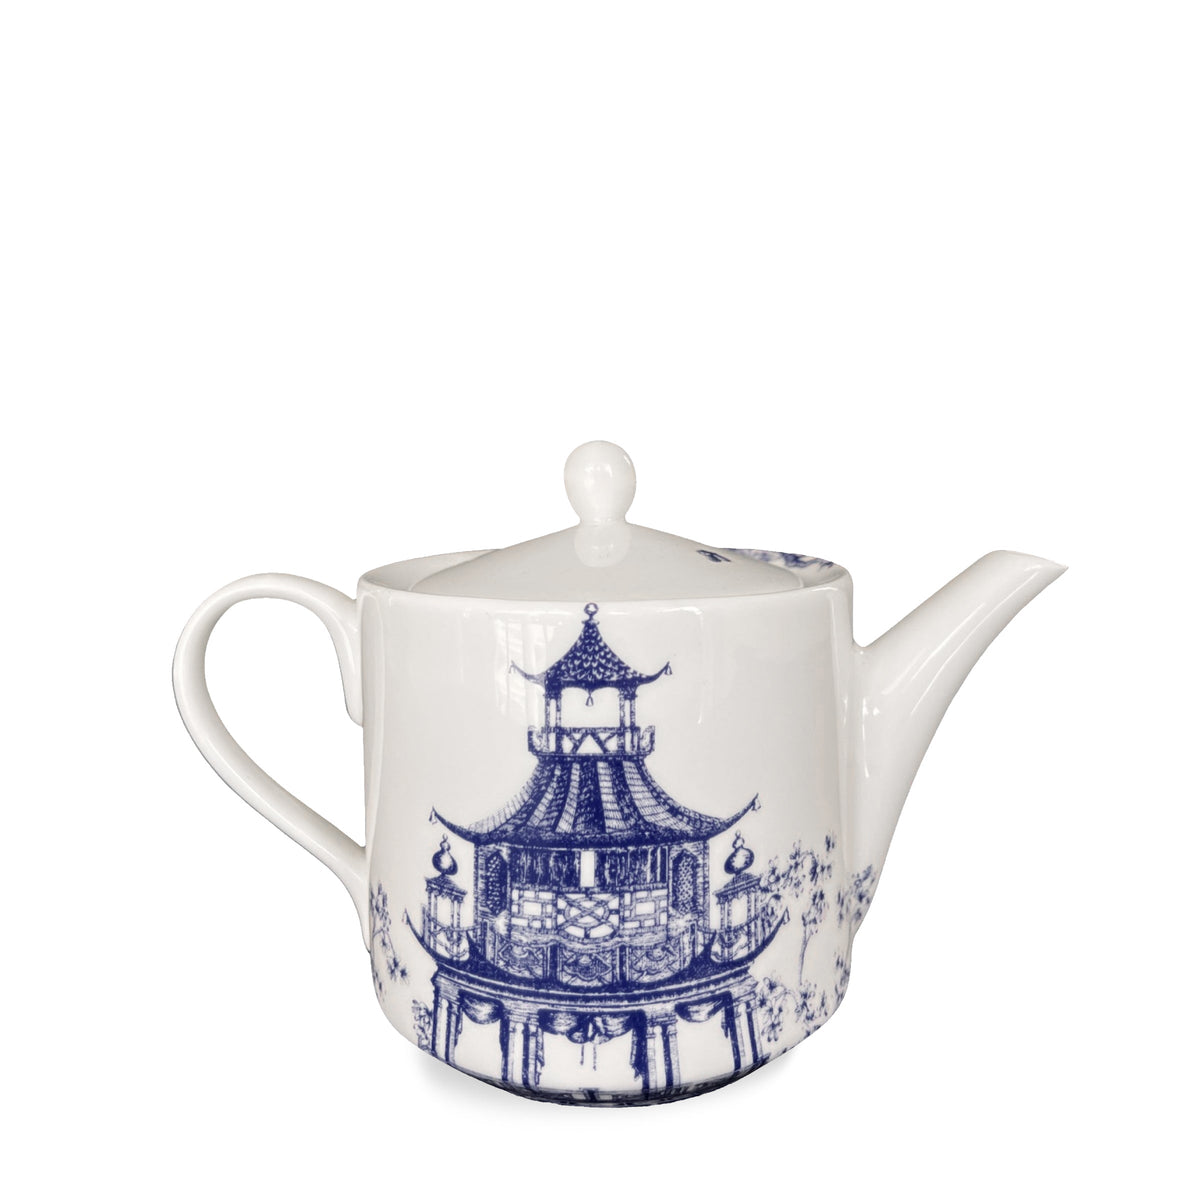 A Caskata Chinoiserie Toile Petite Teapot hand-decorated with a blue and white design.